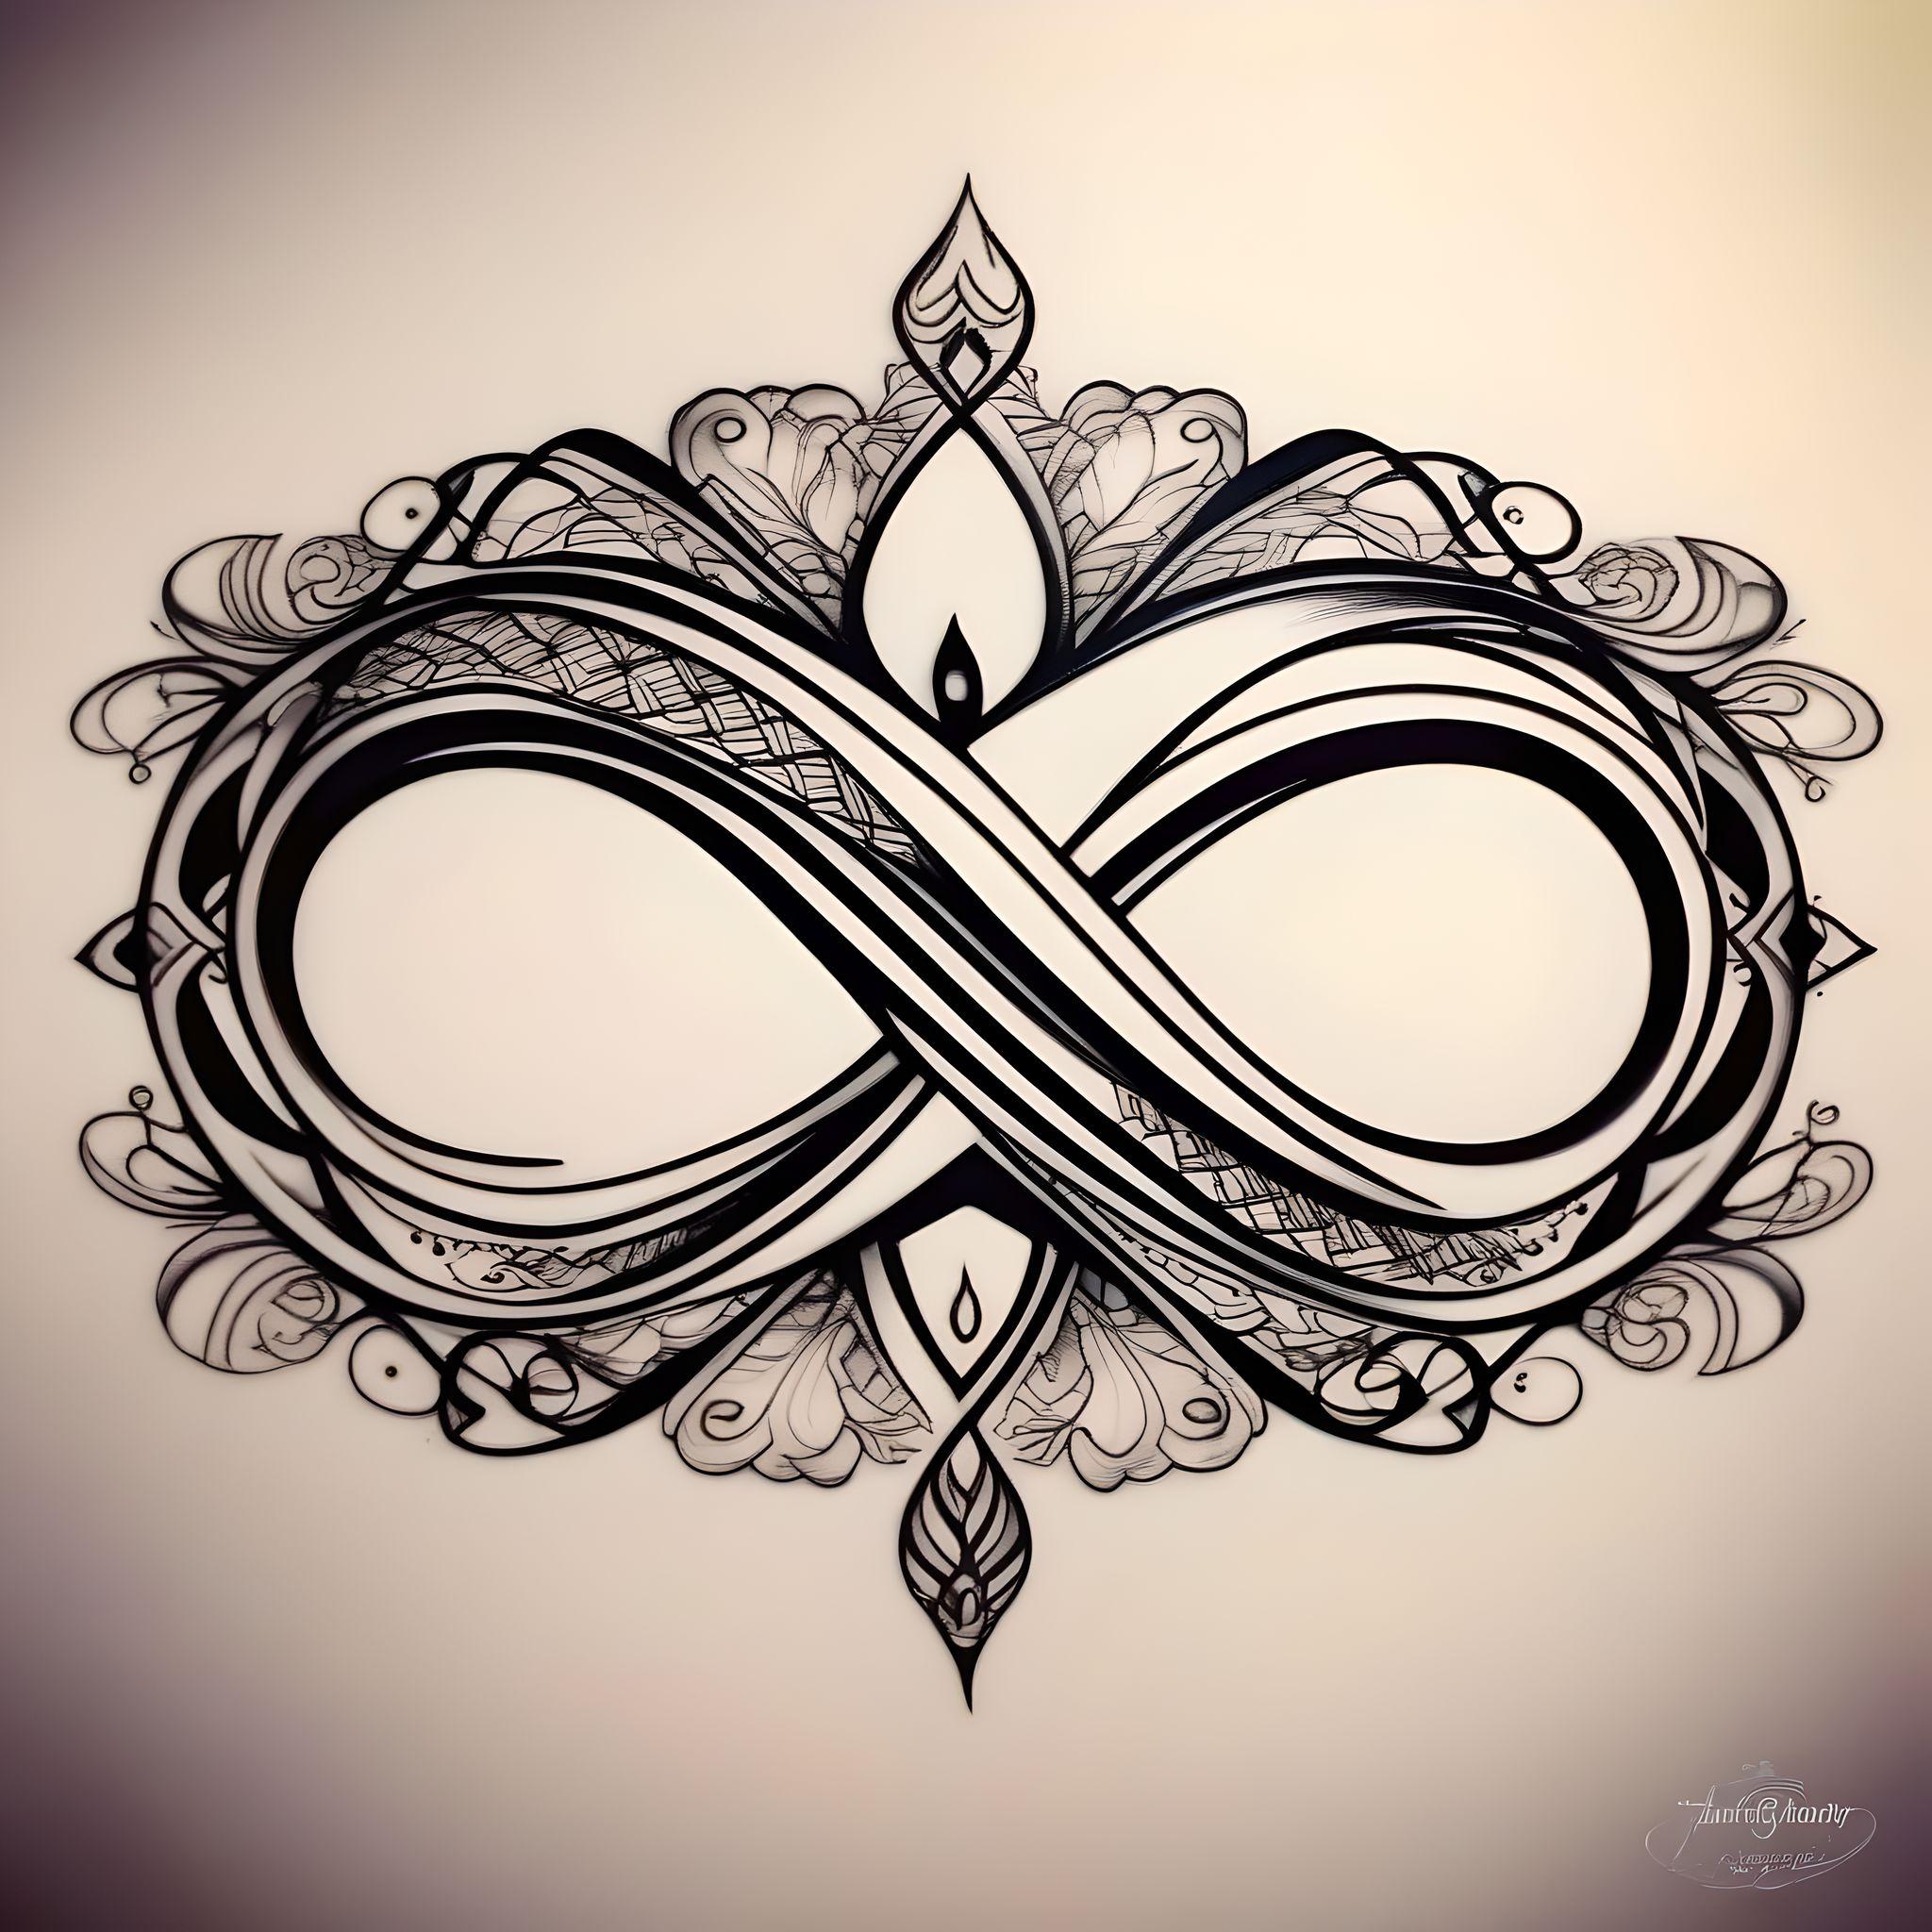 infinity family tattoo design made by fotor ai image generator